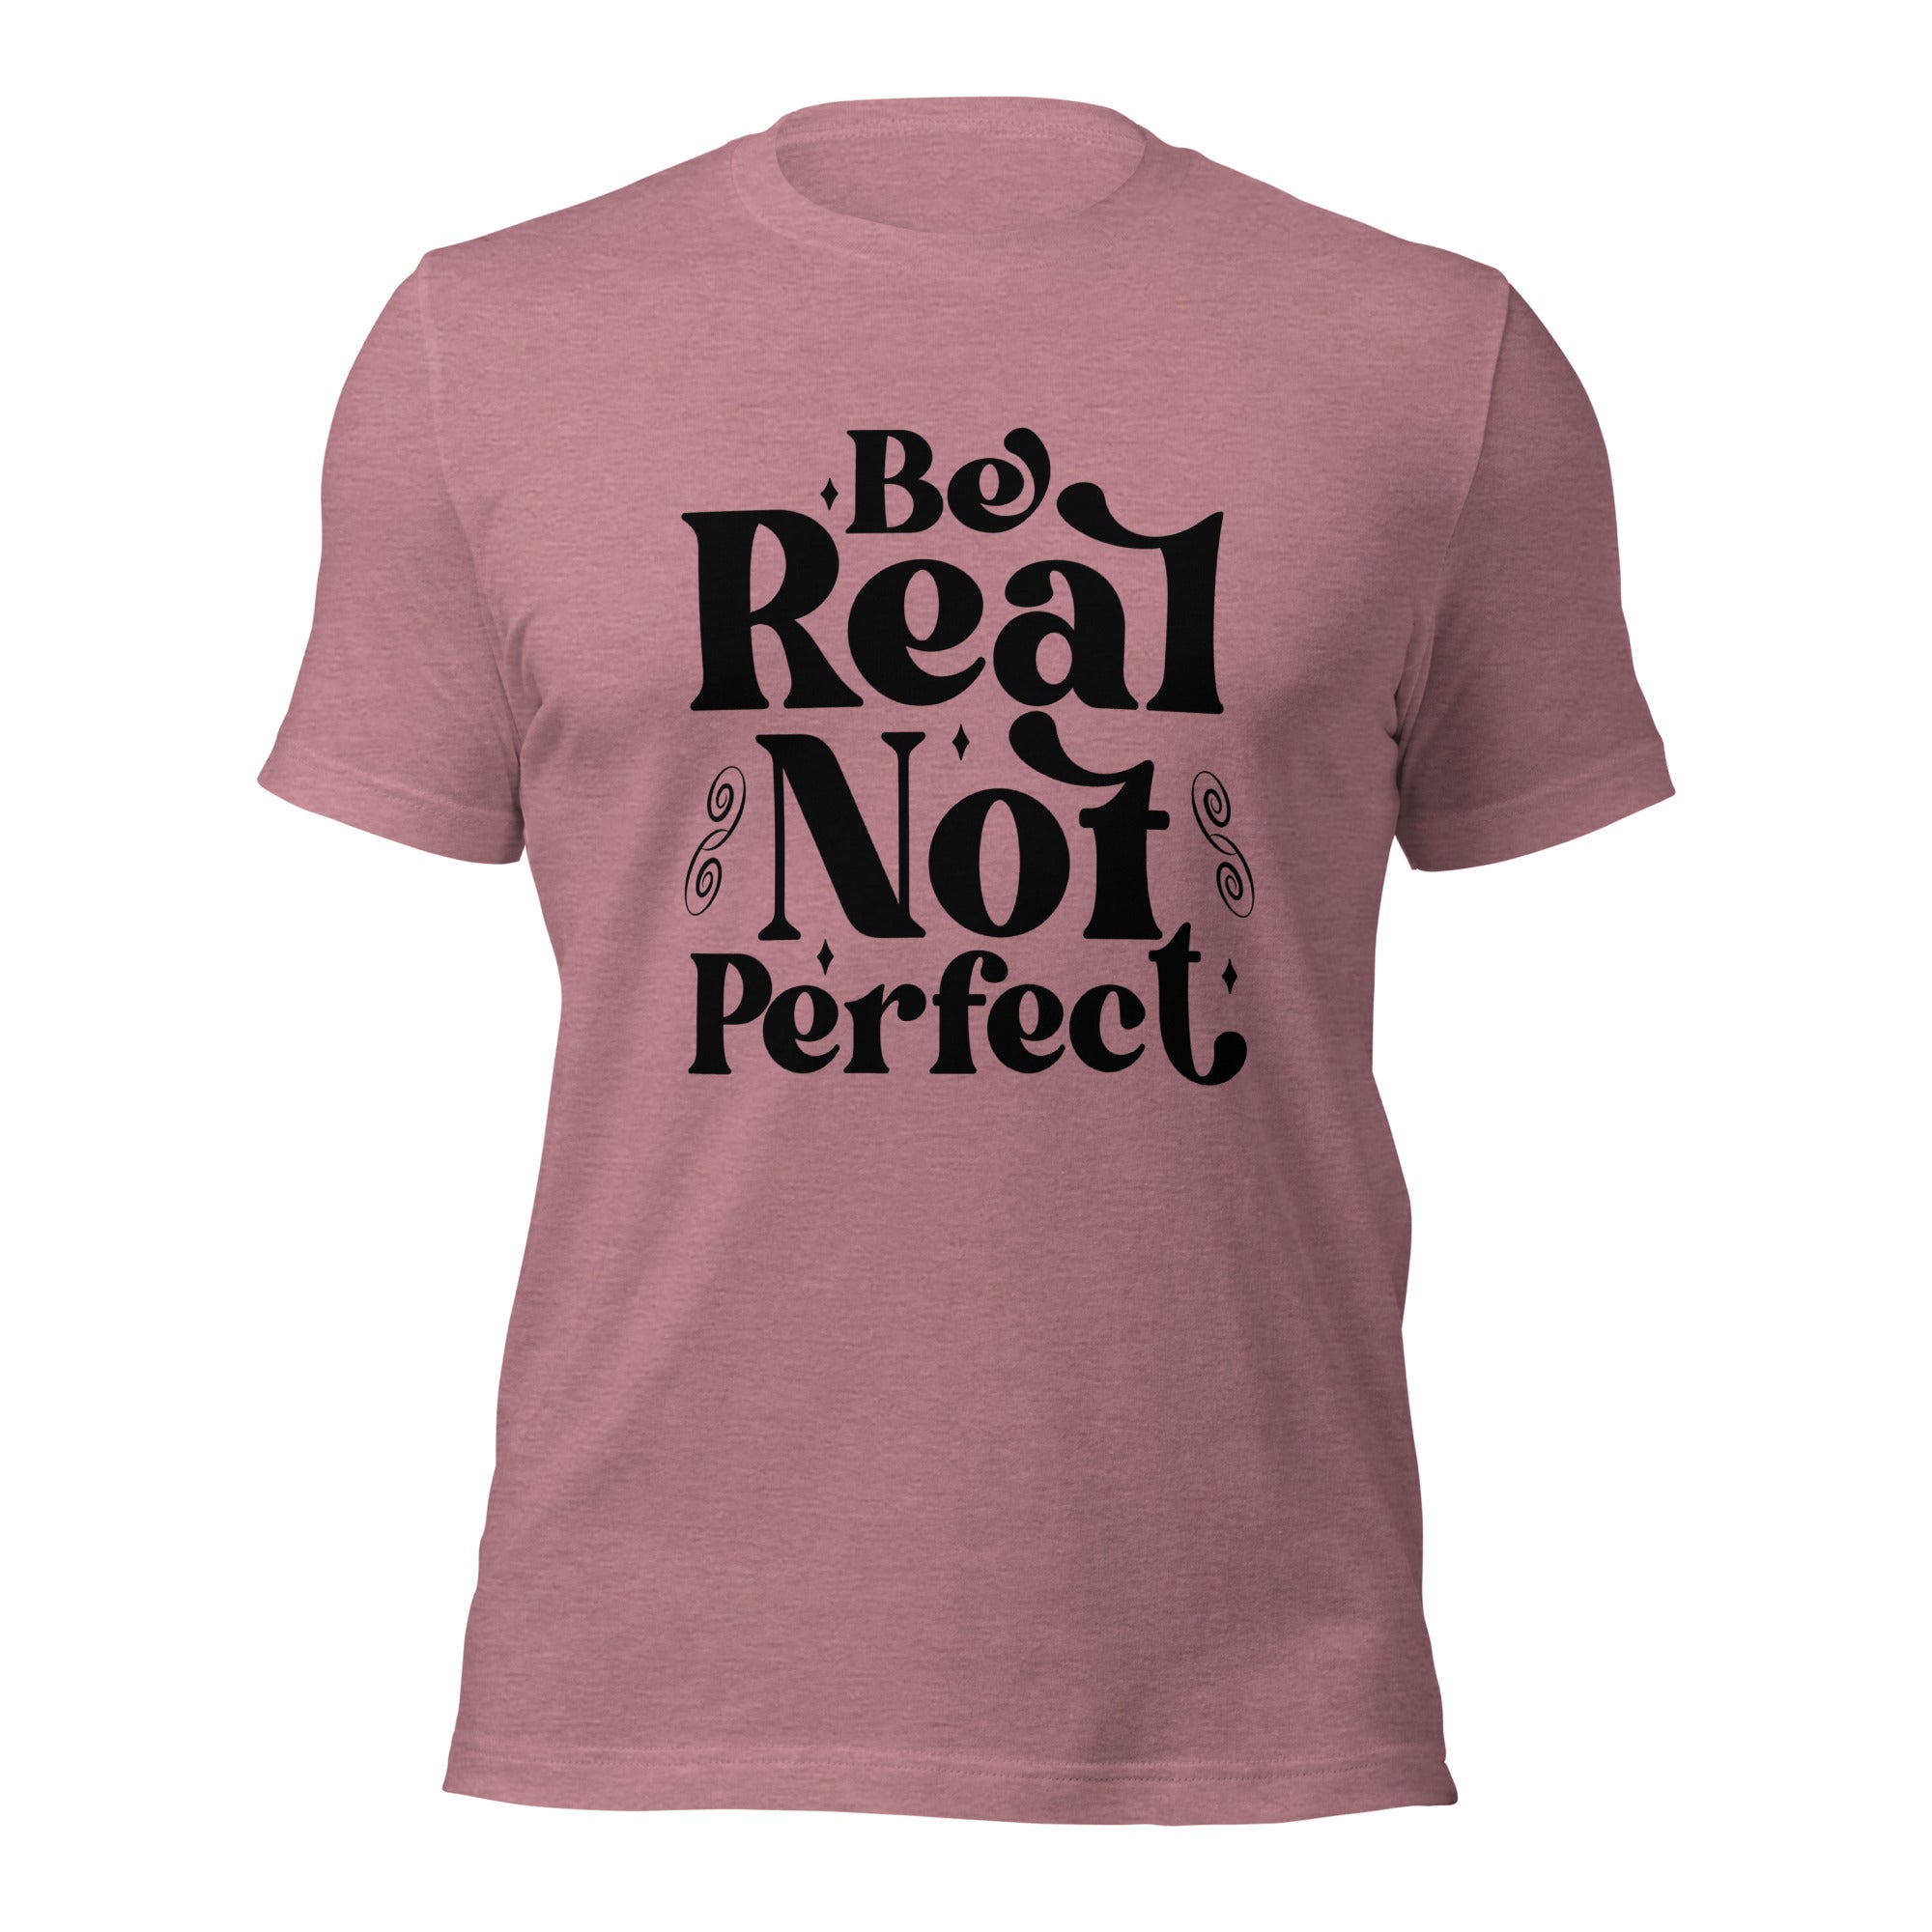 Be Real, Not Perfect - T-shirt